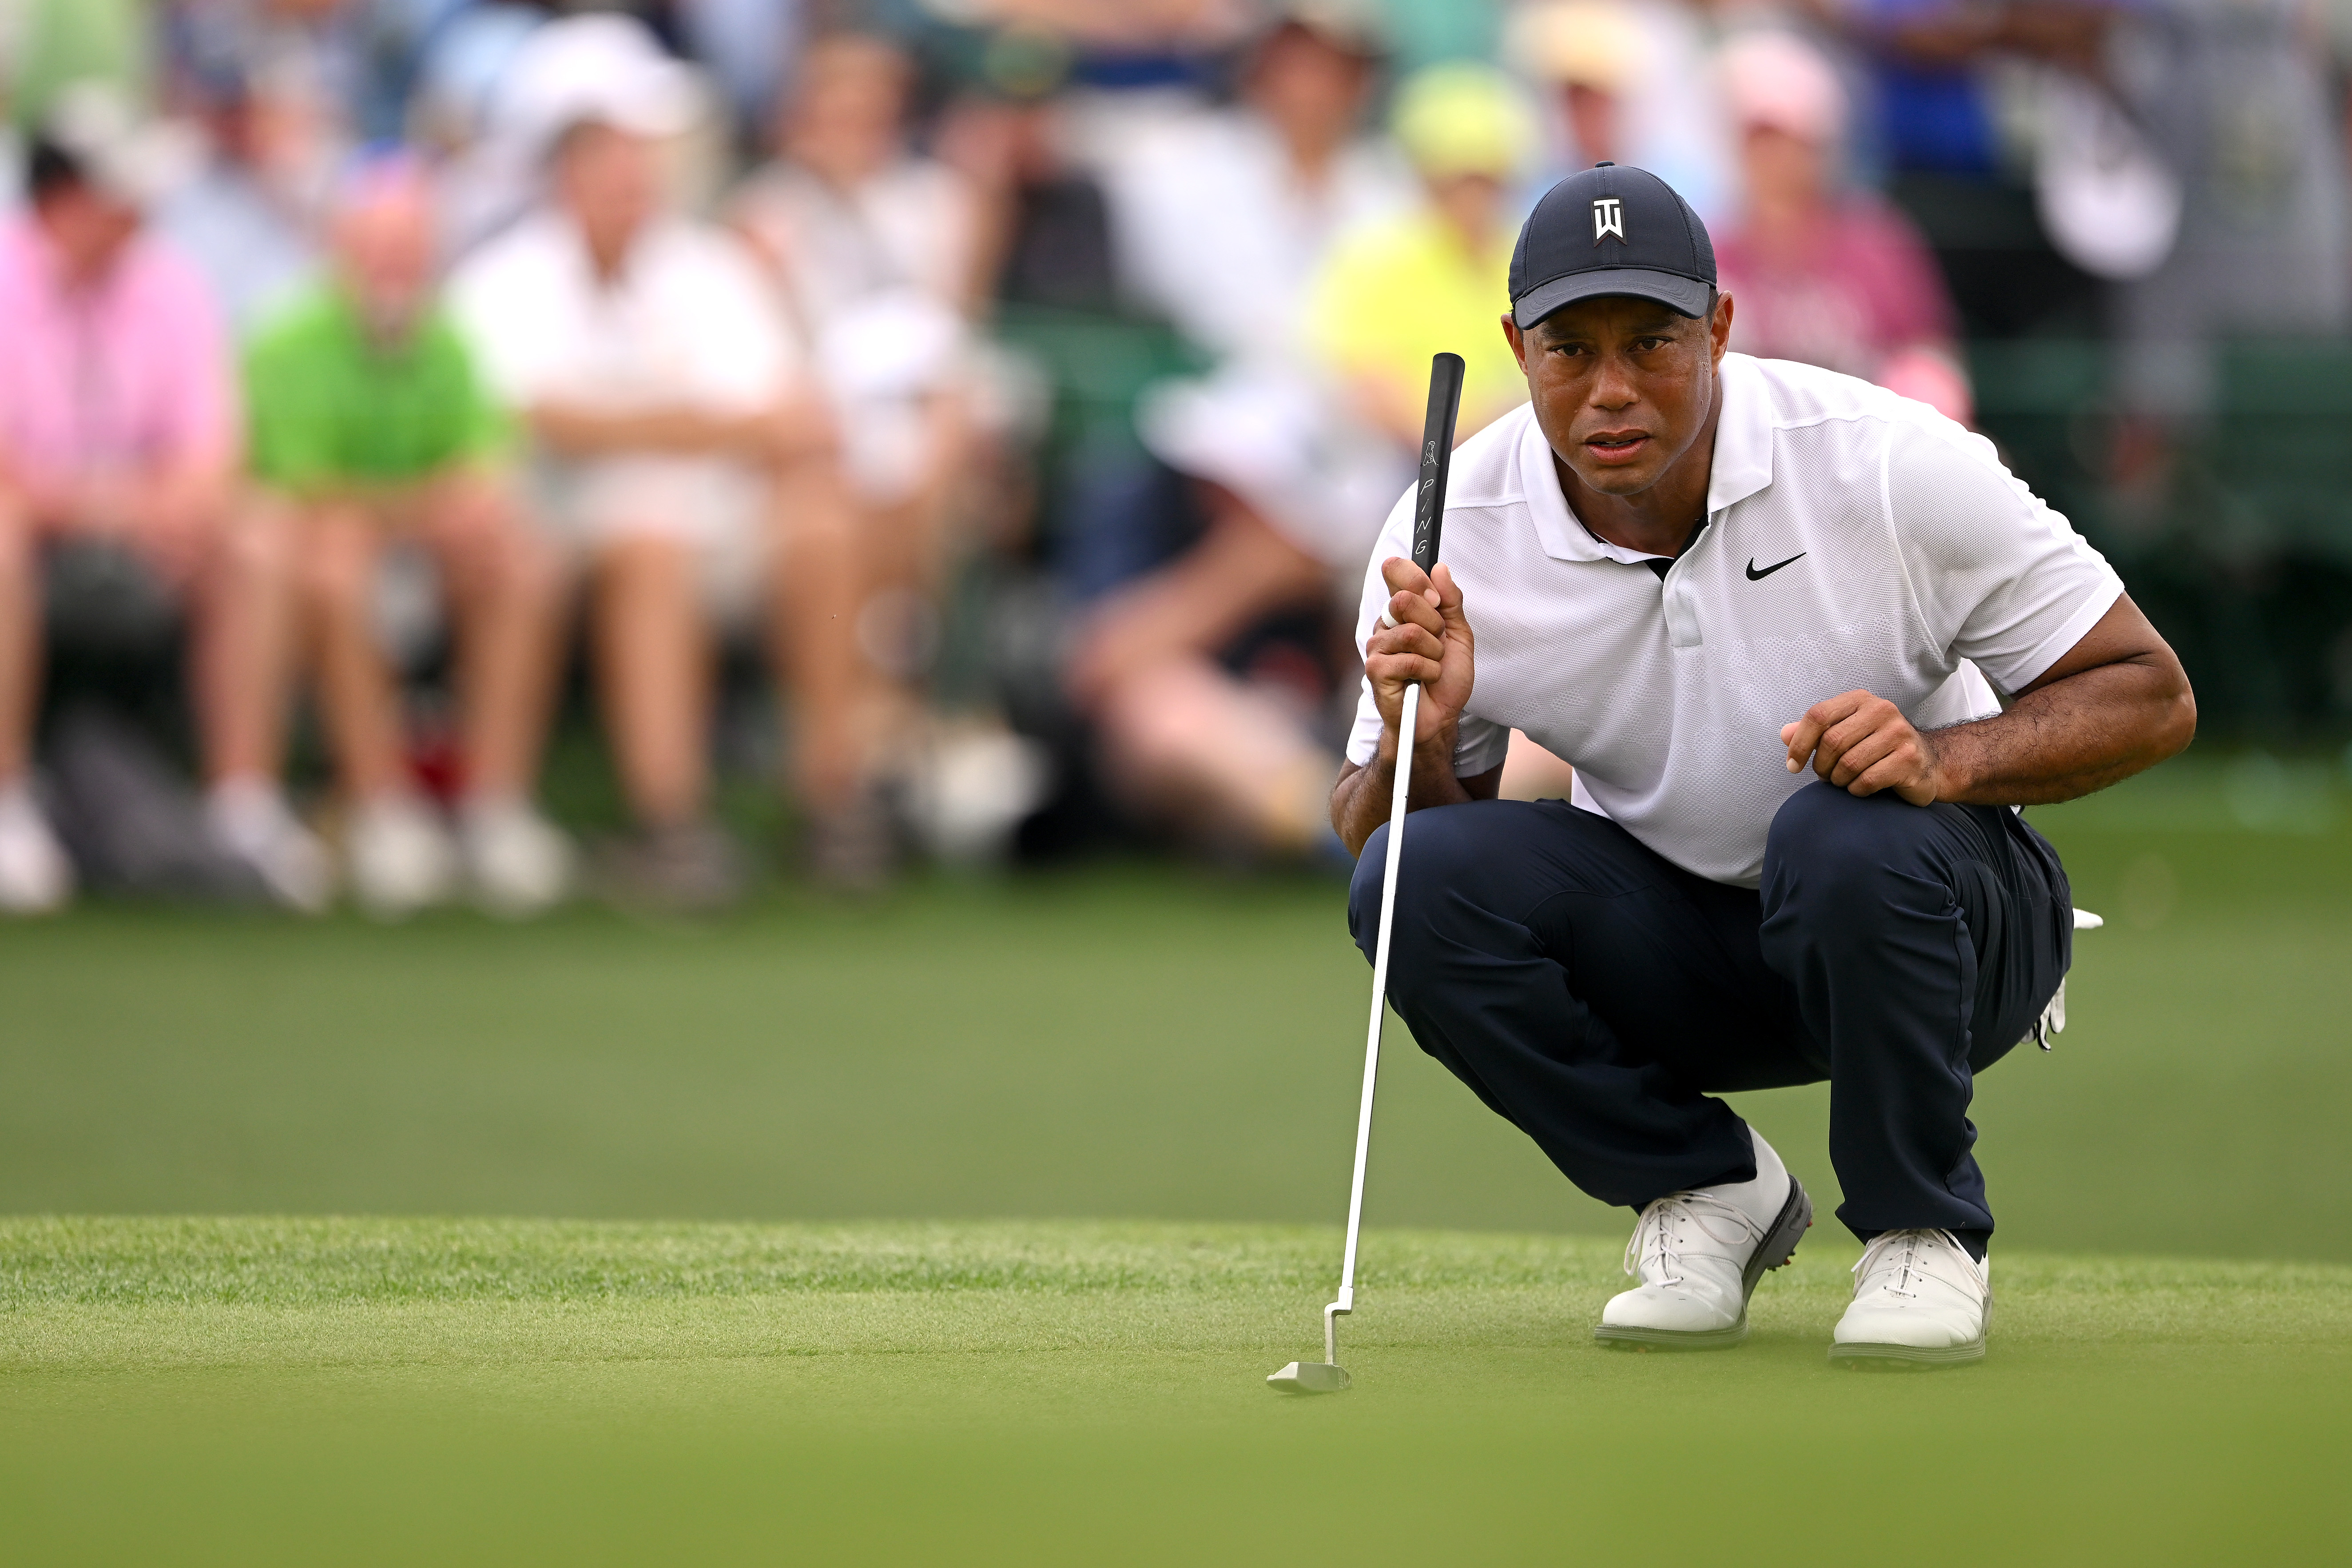 Tiger Woods of the United States lines up a putt on the 18th green during the first round of the 2023 Masters Tournament at Augusta National Golf Club on April 06, 2023 in Augusta, Georgia.